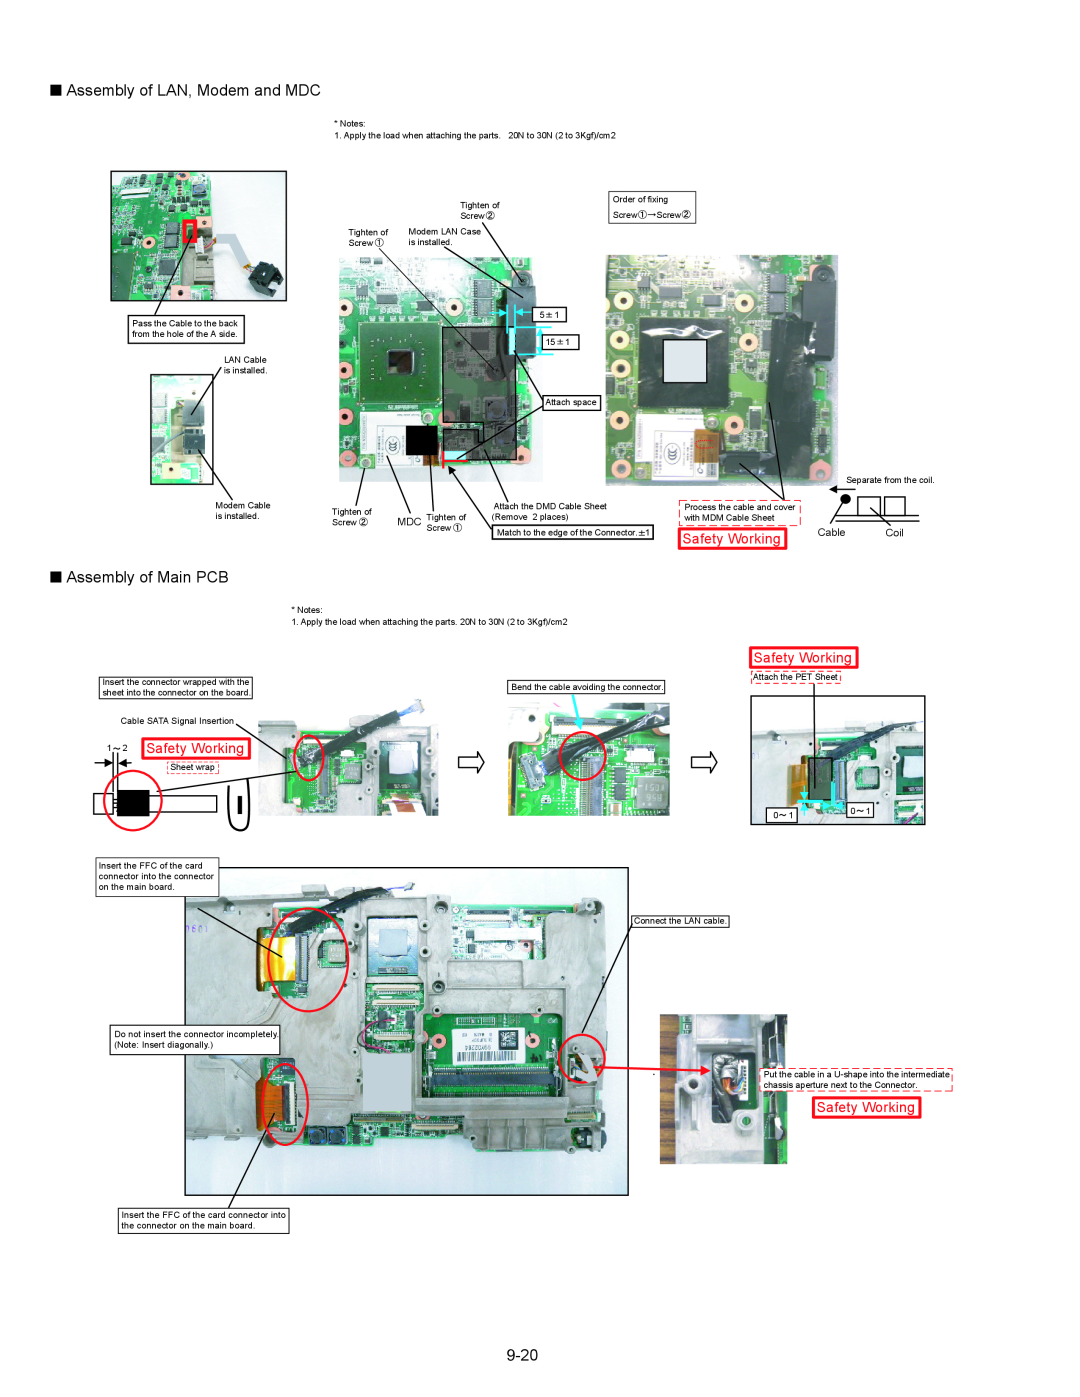 Matsushita CF-30 service manual Q Assembly of LAN, Modem and MDC, Q Assembly of Main PCB, 9-20, Safety Working, Cable, Coil 